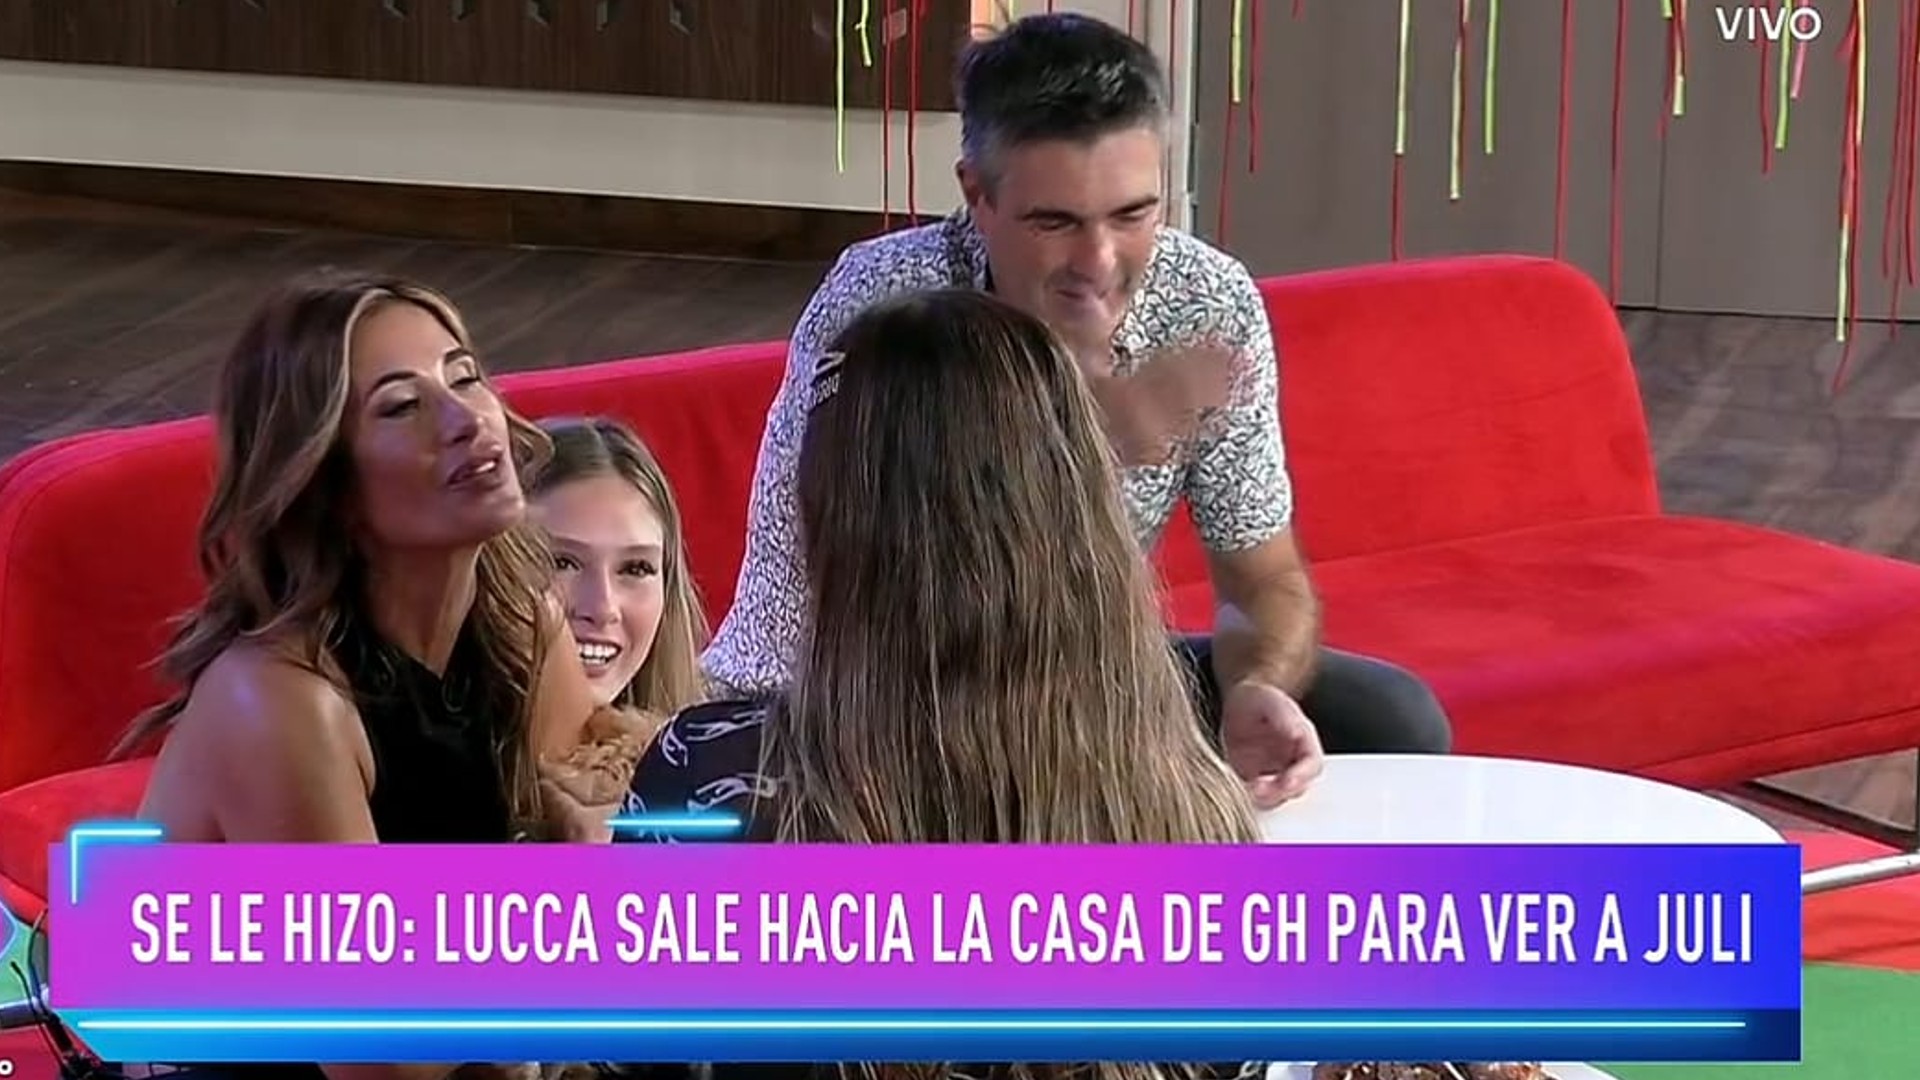 Julieta received a visit from her family in Big Brother (Photo: Capture Telefe)